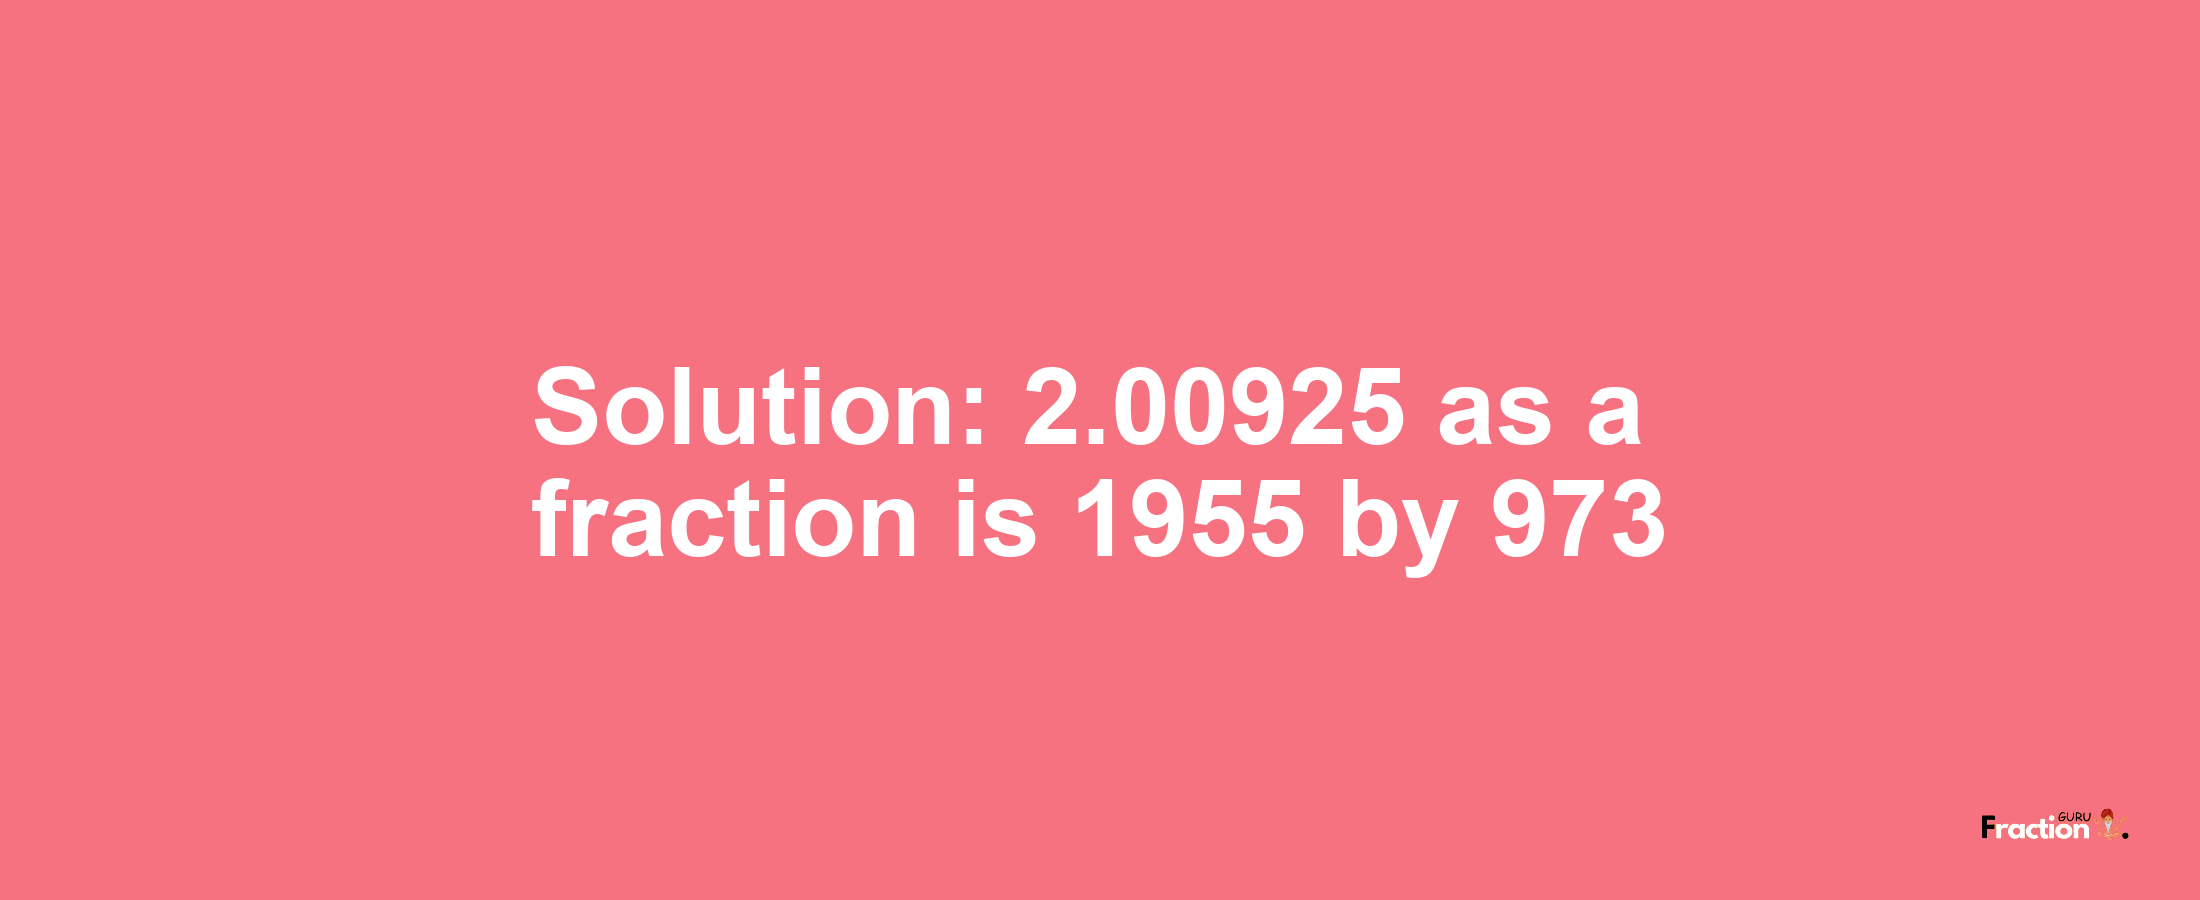 Solution:2.00925 as a fraction is 1955/973